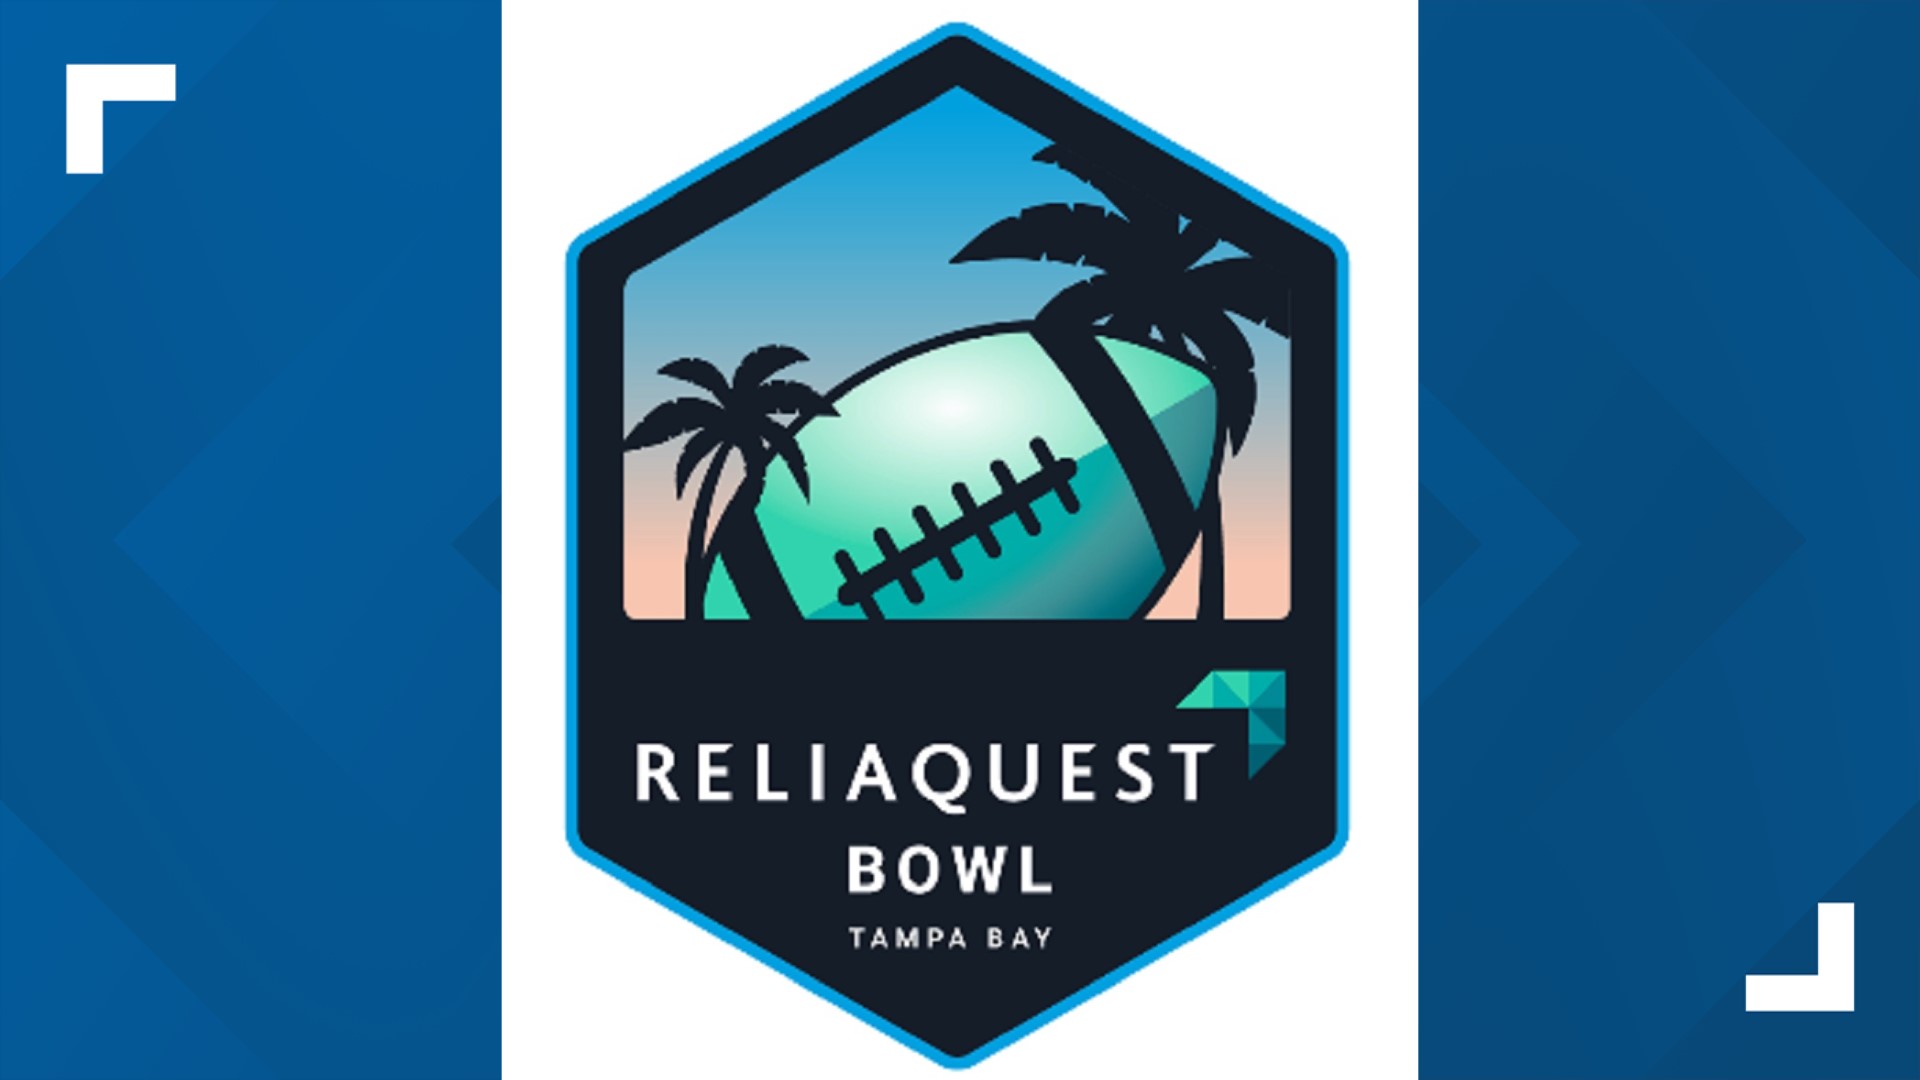 ReliaQuest Bowl How to get tickets